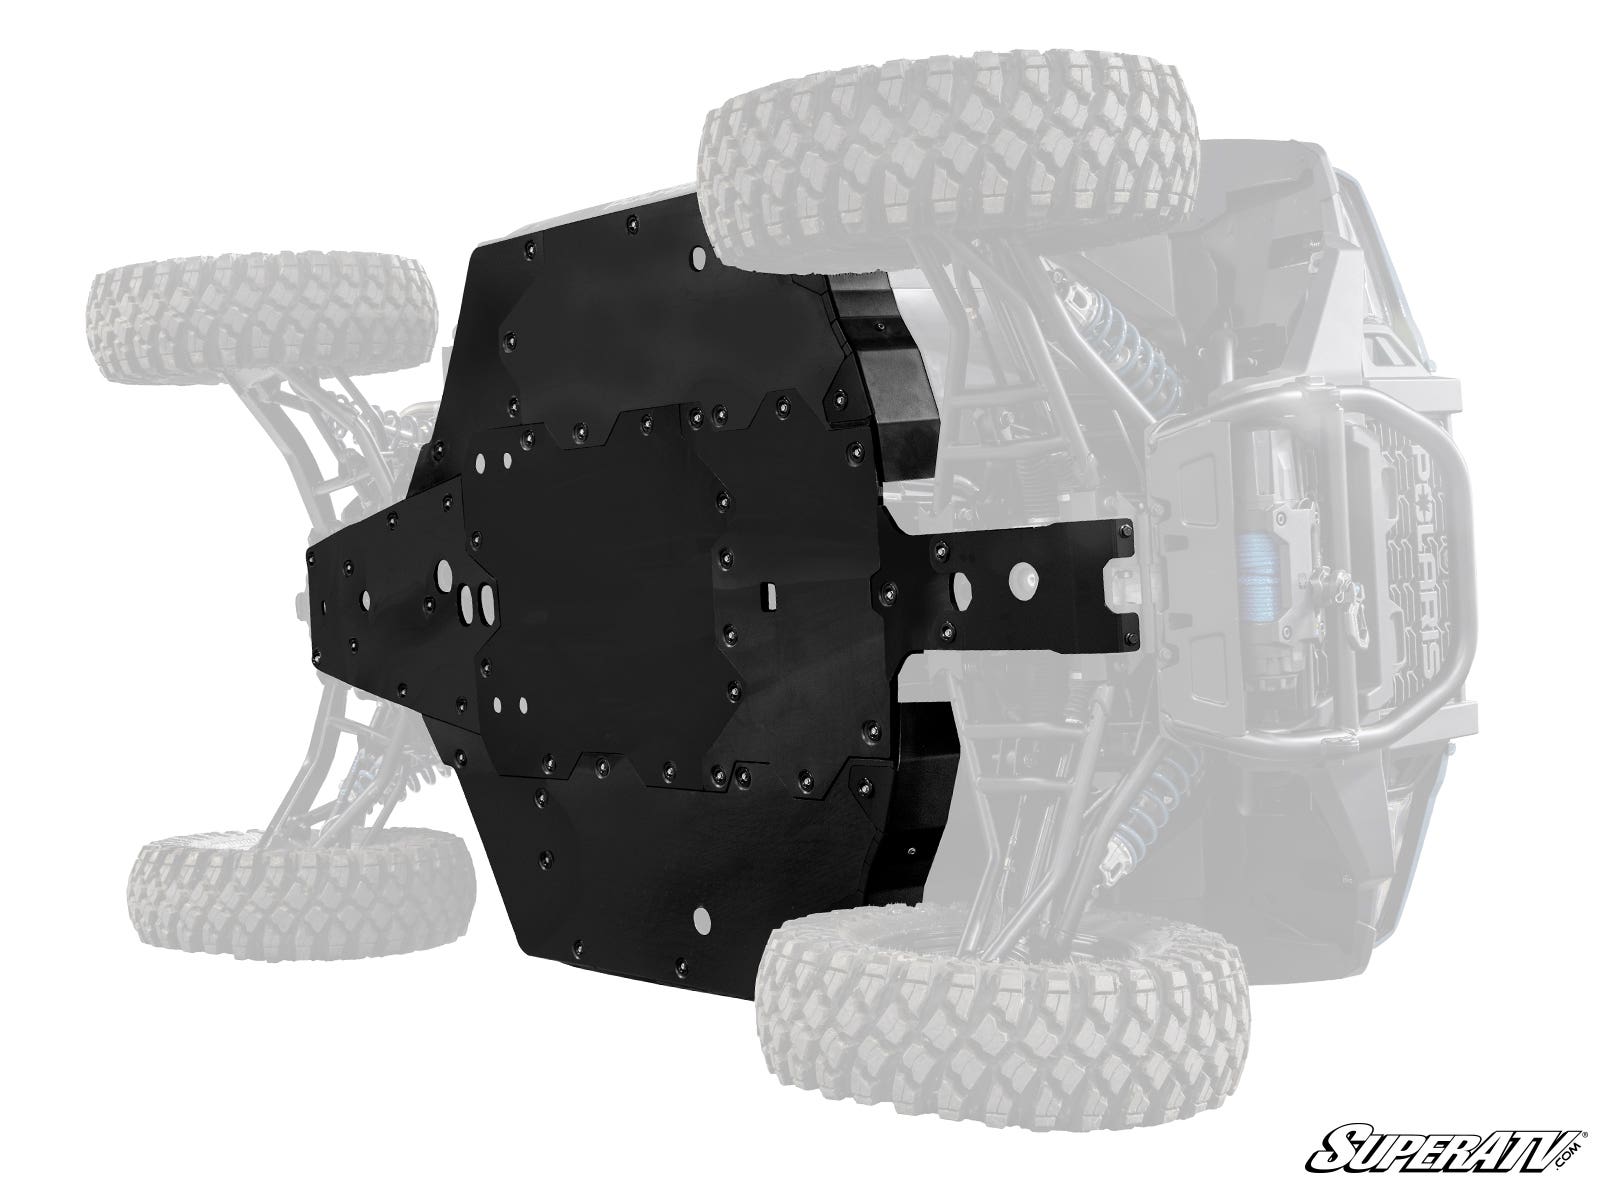 Polaris Xpedition Full Skid Plate